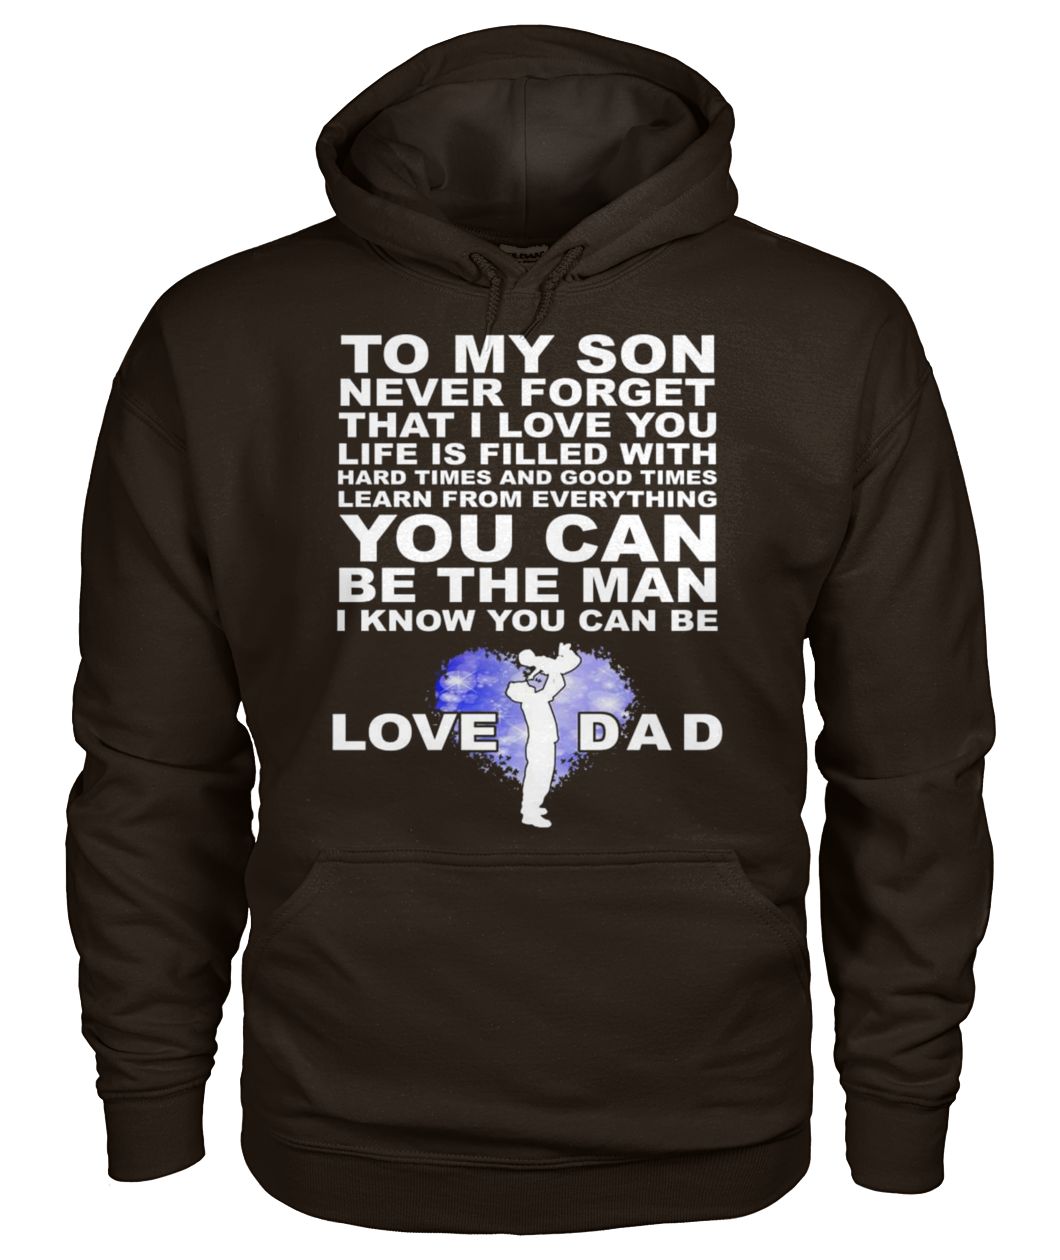 To my son never forget I love you love dad gildan hoodie